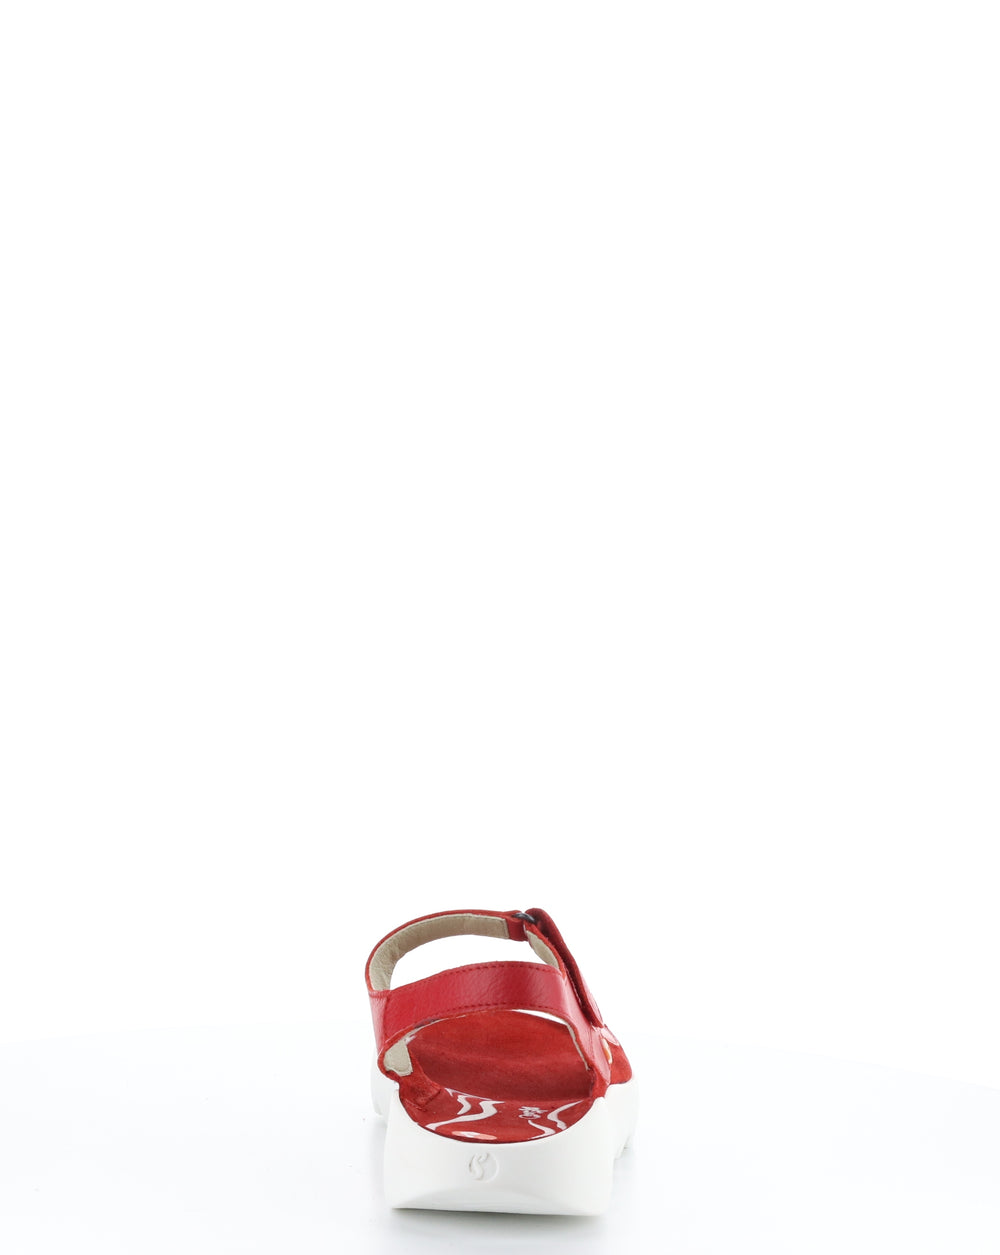 WEAL712SOF 005 CHERRY RED Velcro Sandals